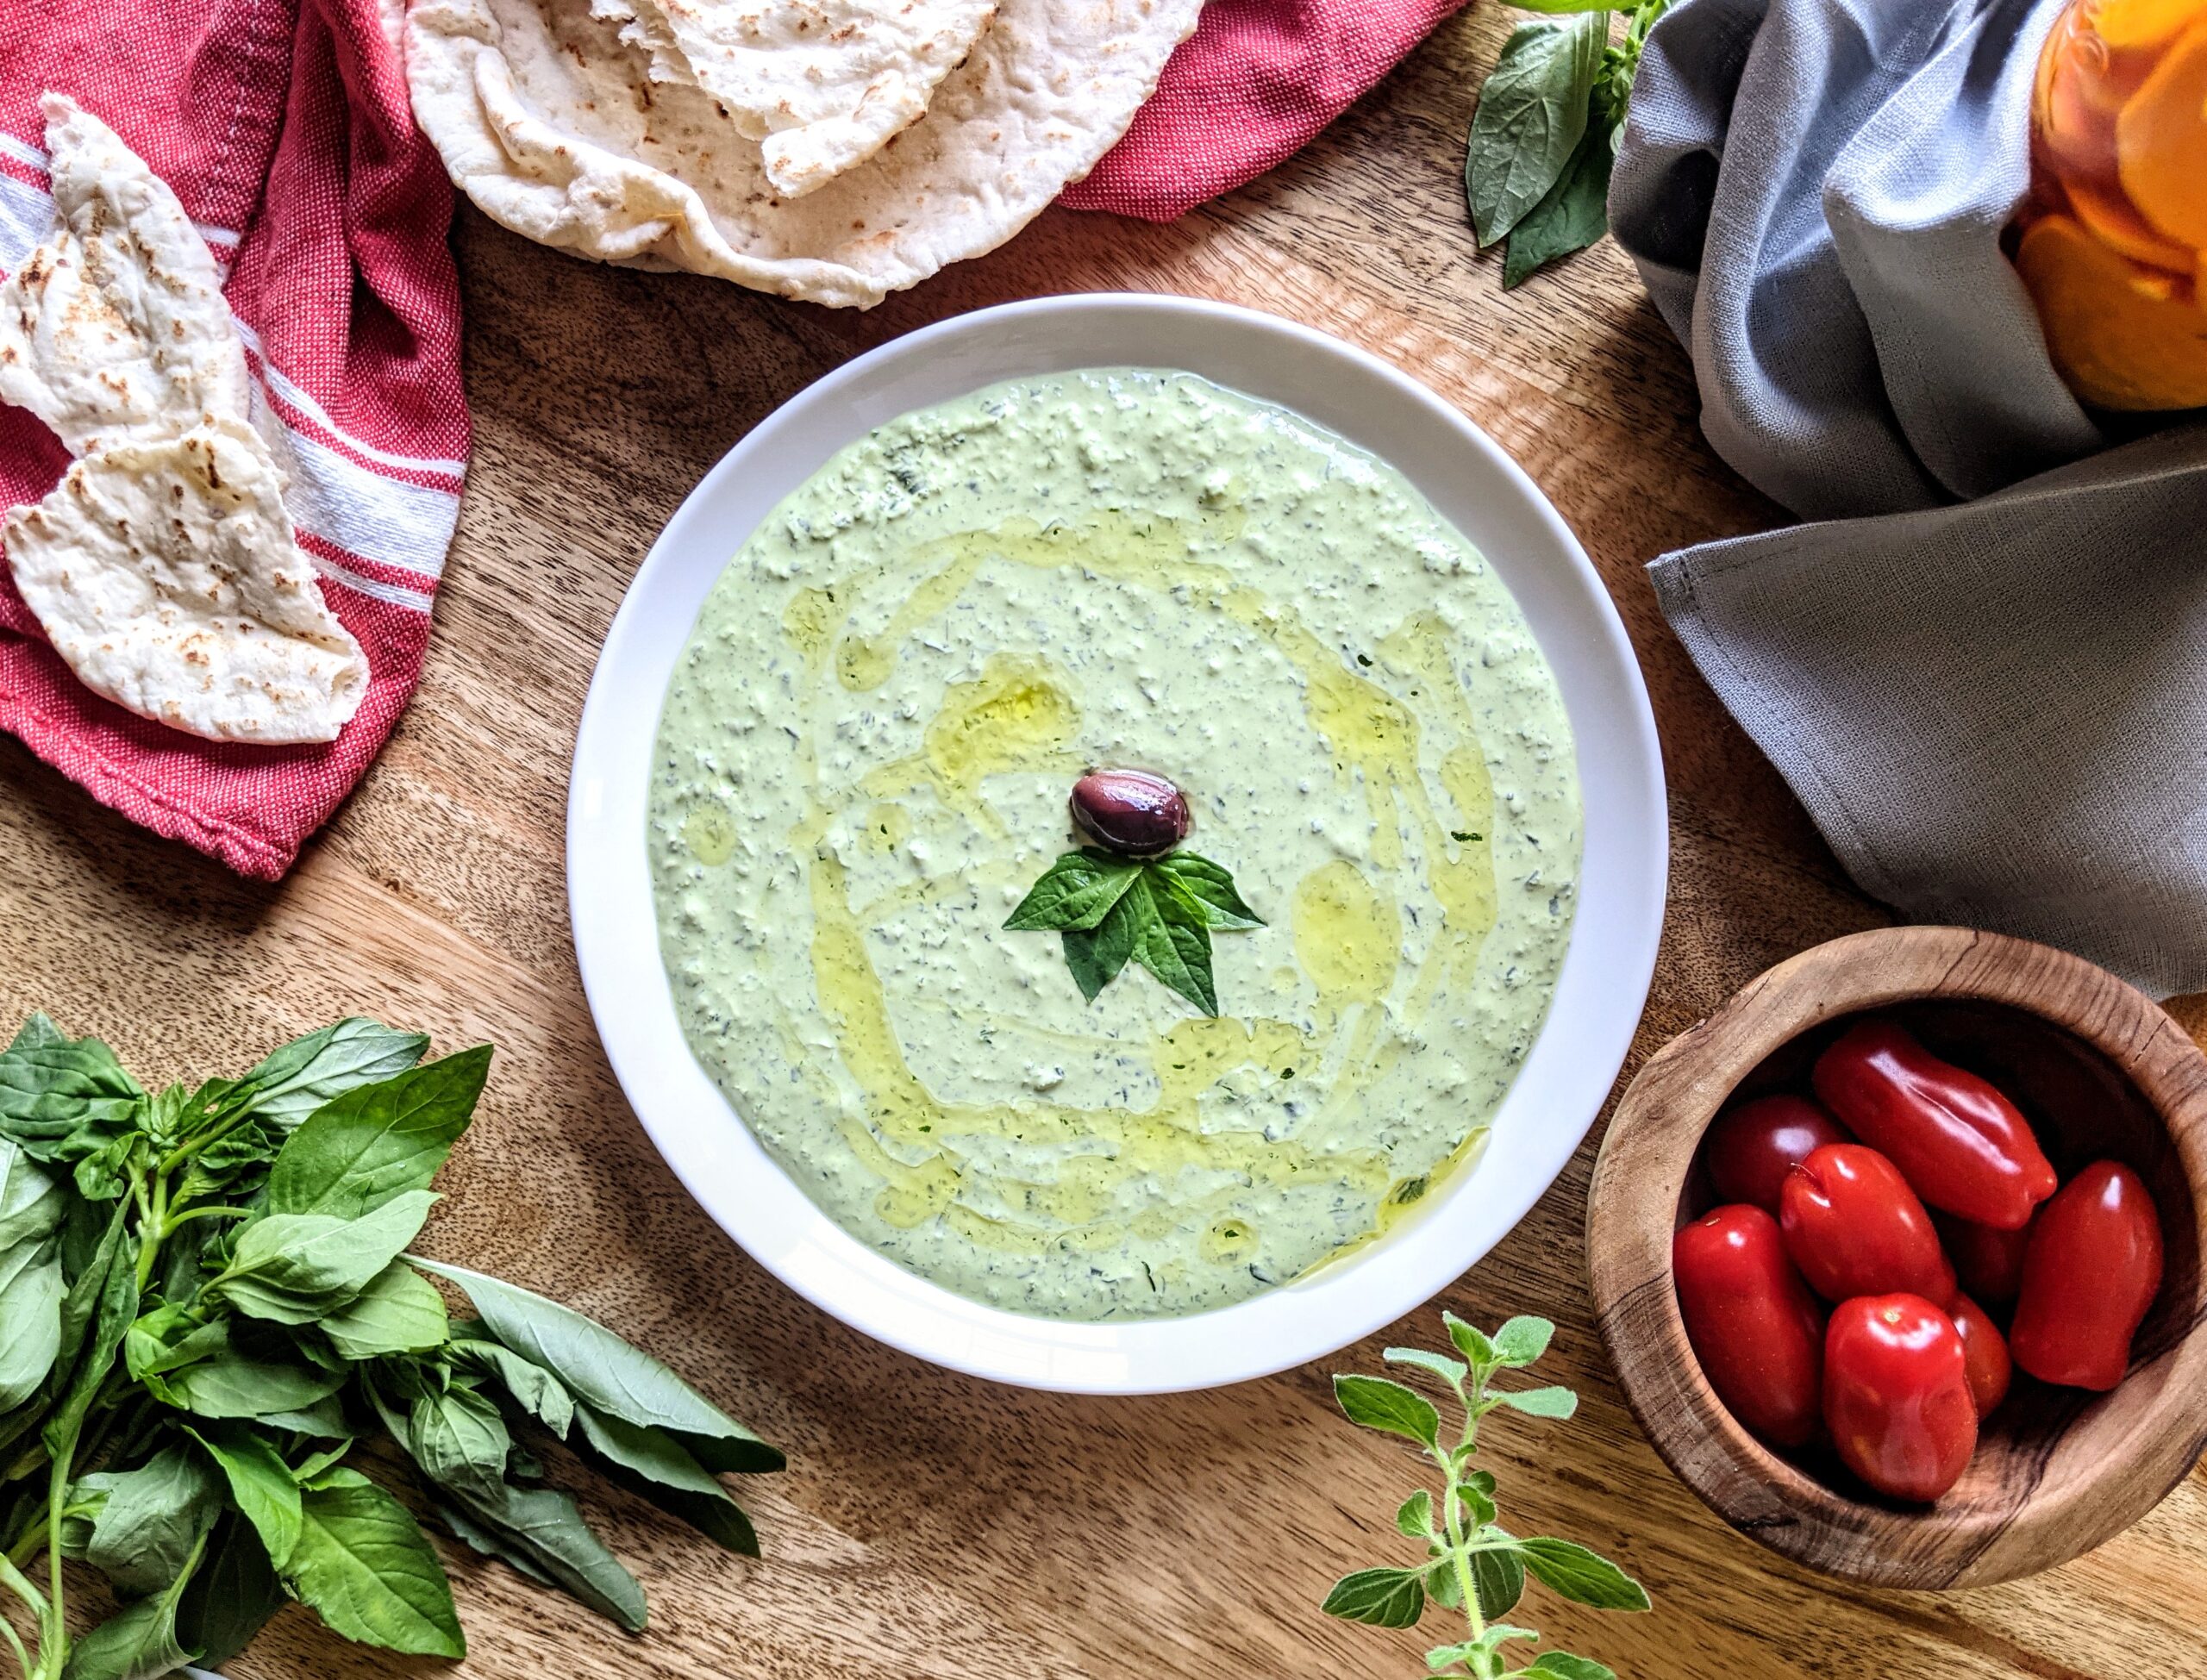 A plate of fresh herb and labneh dip, garnished with a Kalamata olive and a few basil leaves. Serve alongside warm pita bread and San Marzano tomatoes.